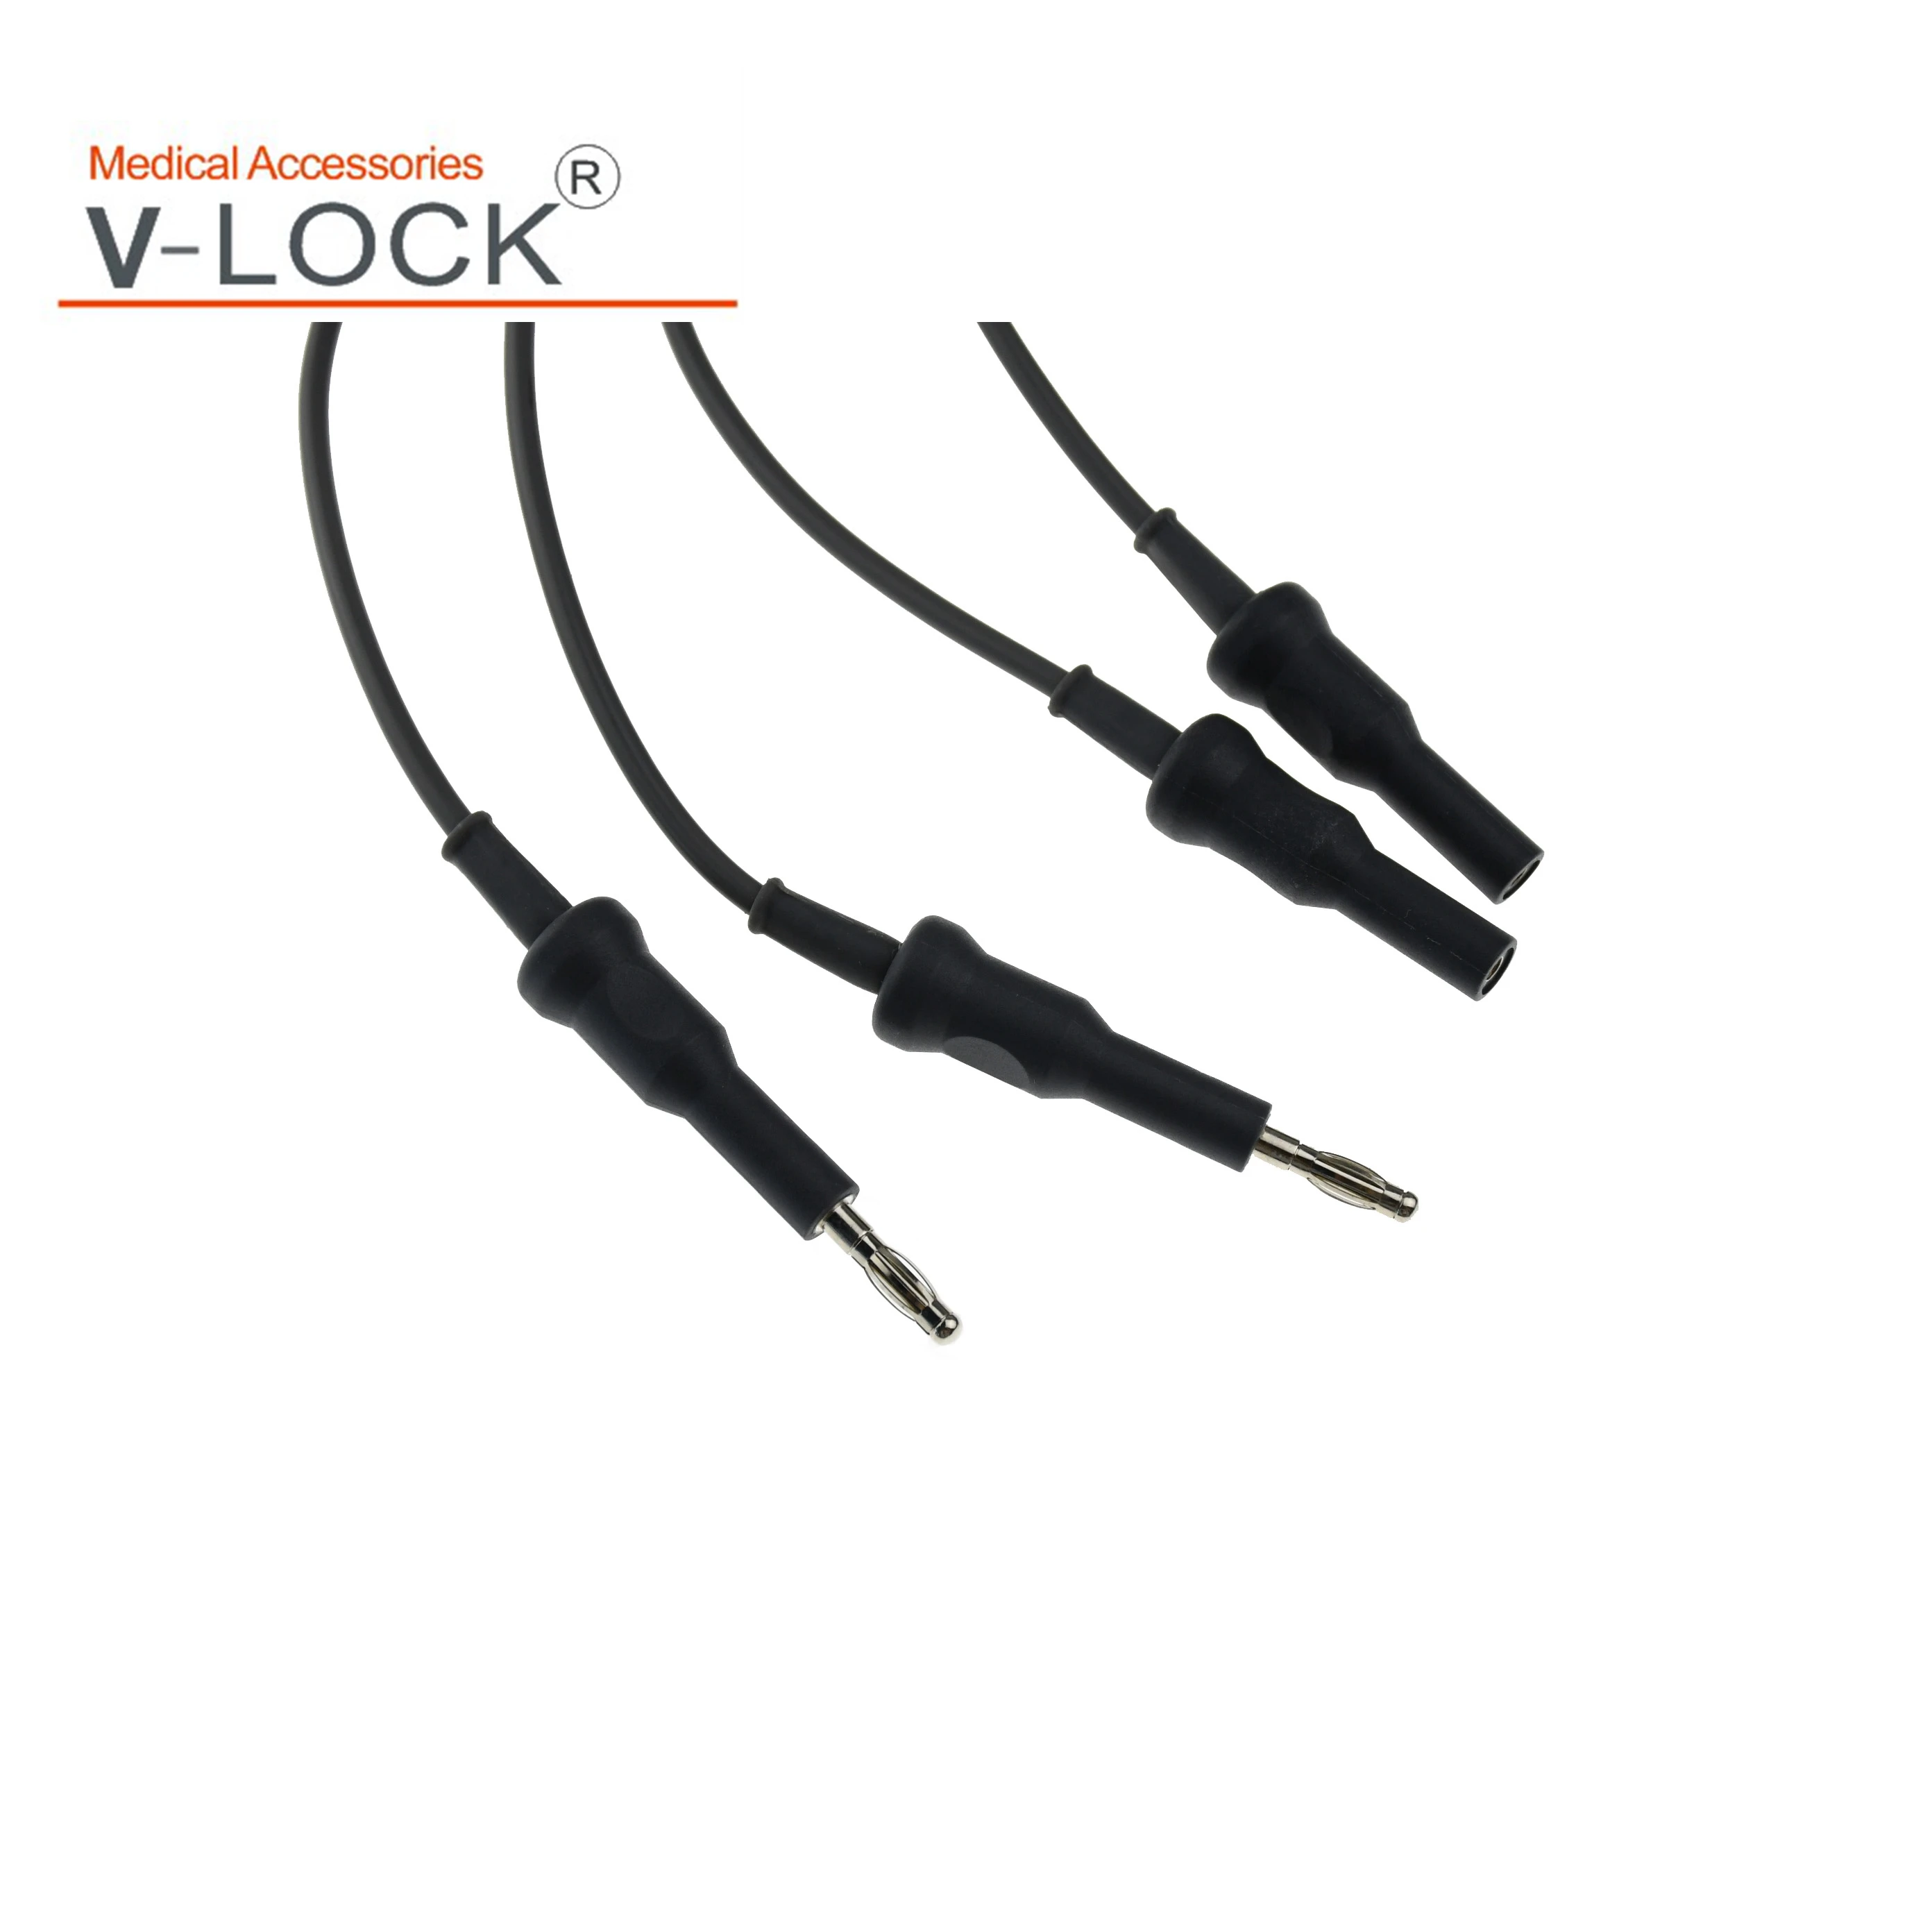 Reusable Bipolar forces cable, electrocoagulation connecting wire, 5/2mm plug to dual 4.0mm banana connector